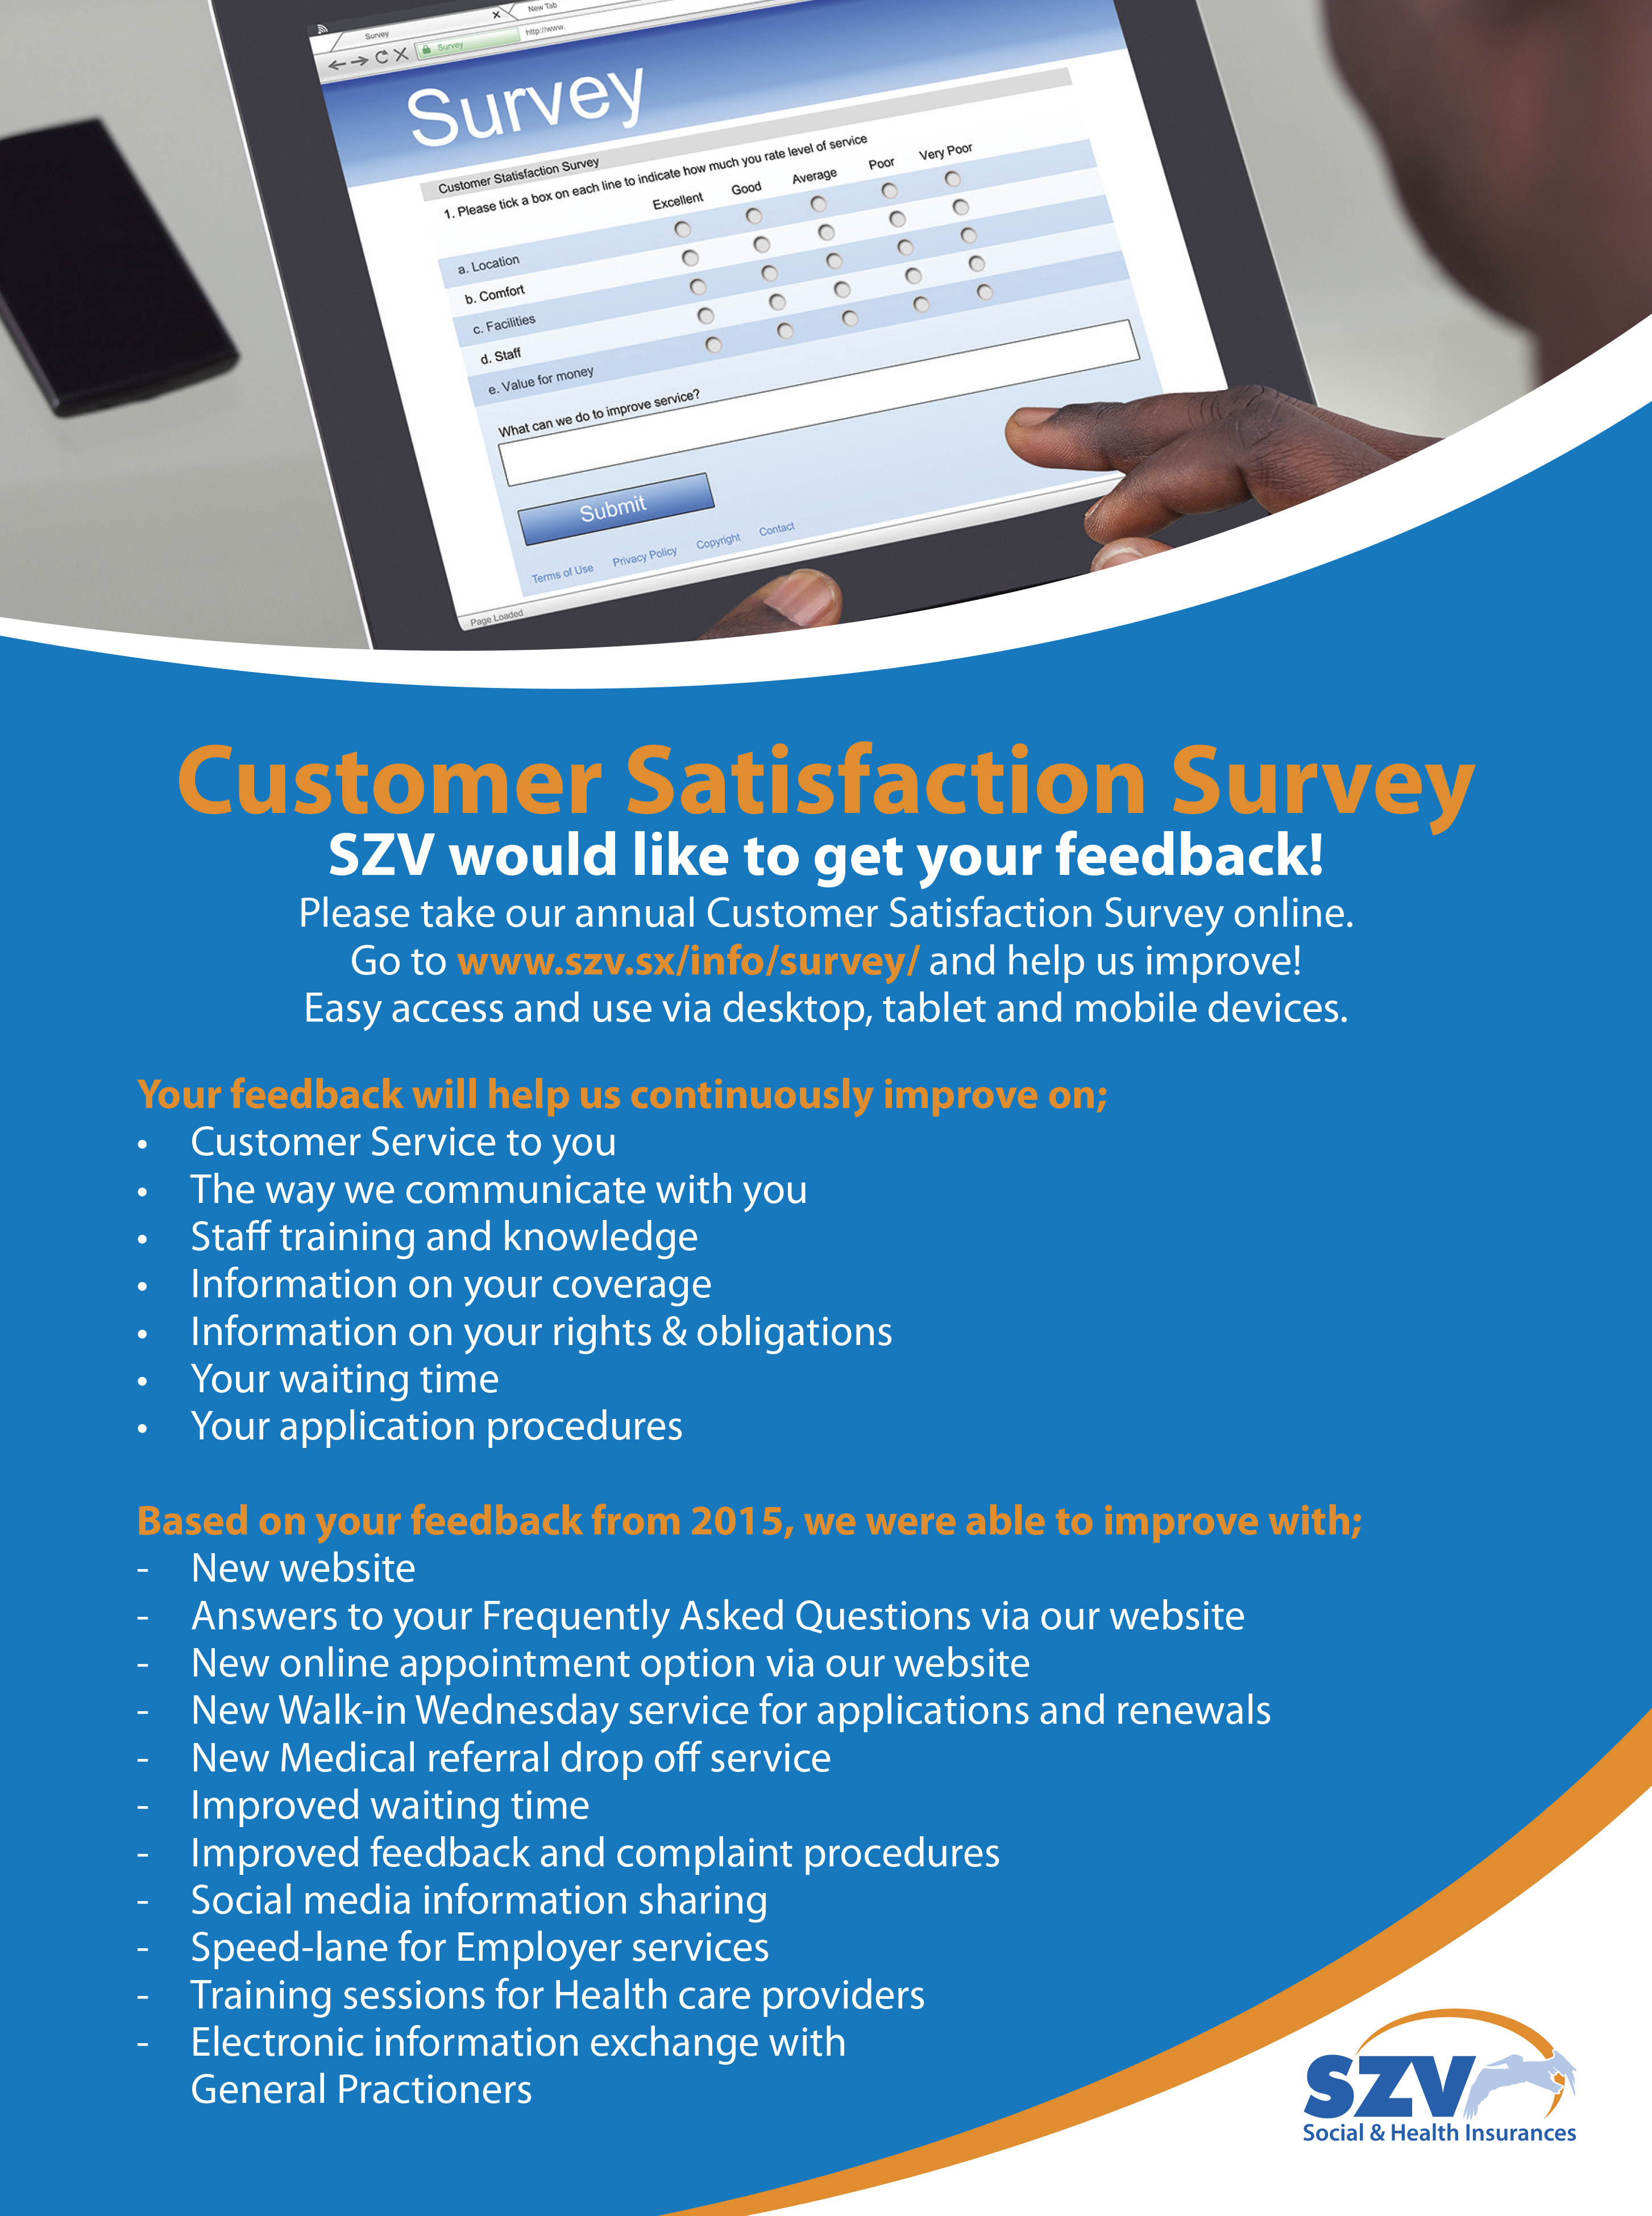 Take part in our Customer Satisfaction Survey 